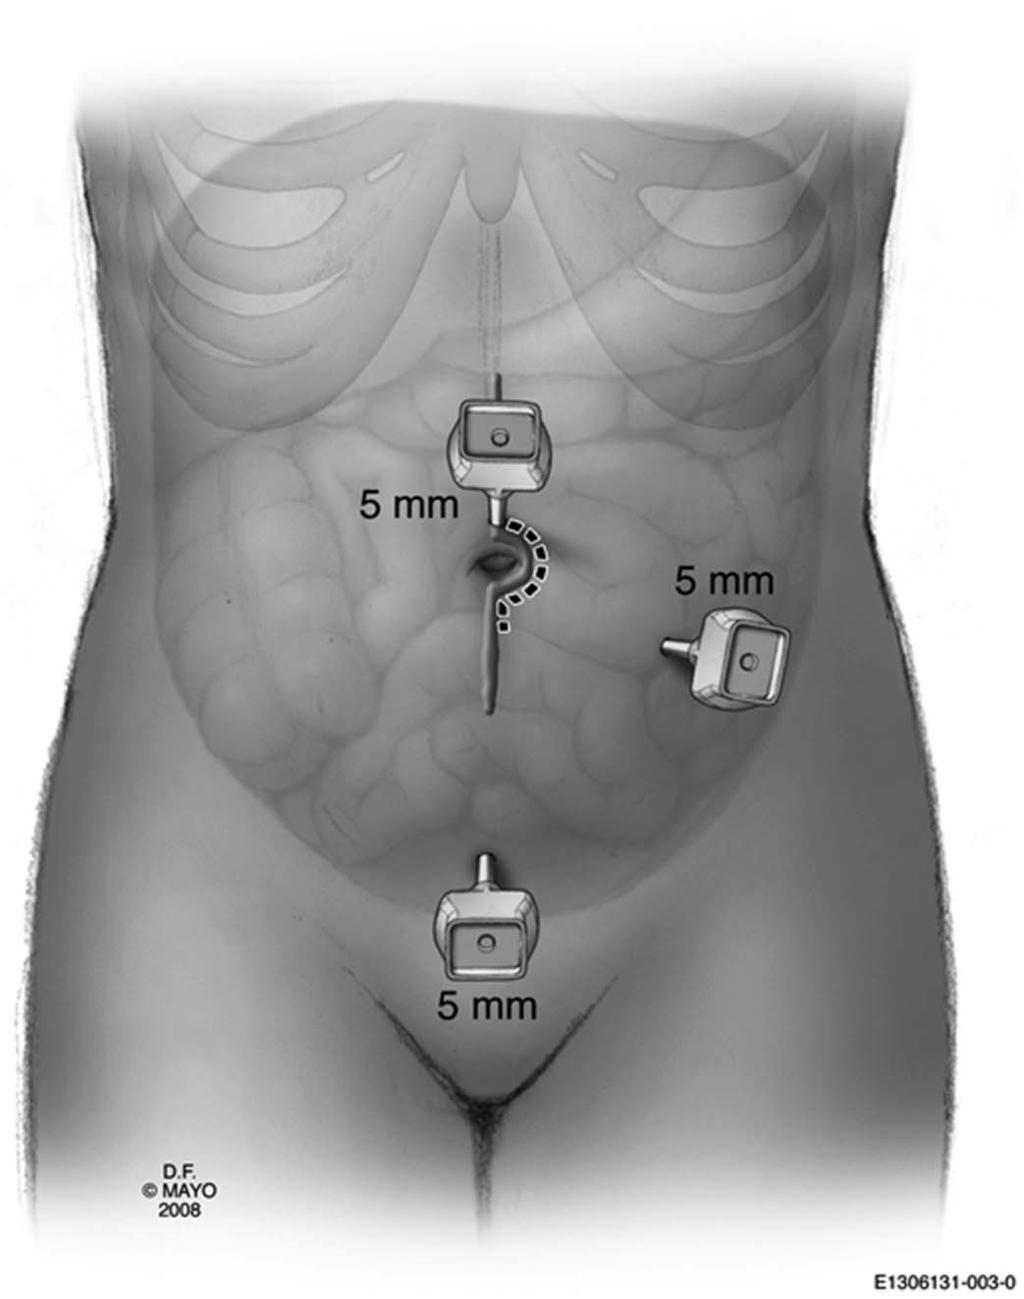 Holder-Murray et al Inflamm Bowel Dis Volume 21, Number 6, June 2015 FIGURE 1. MIS approach to laparoscopic ileocolic resection.